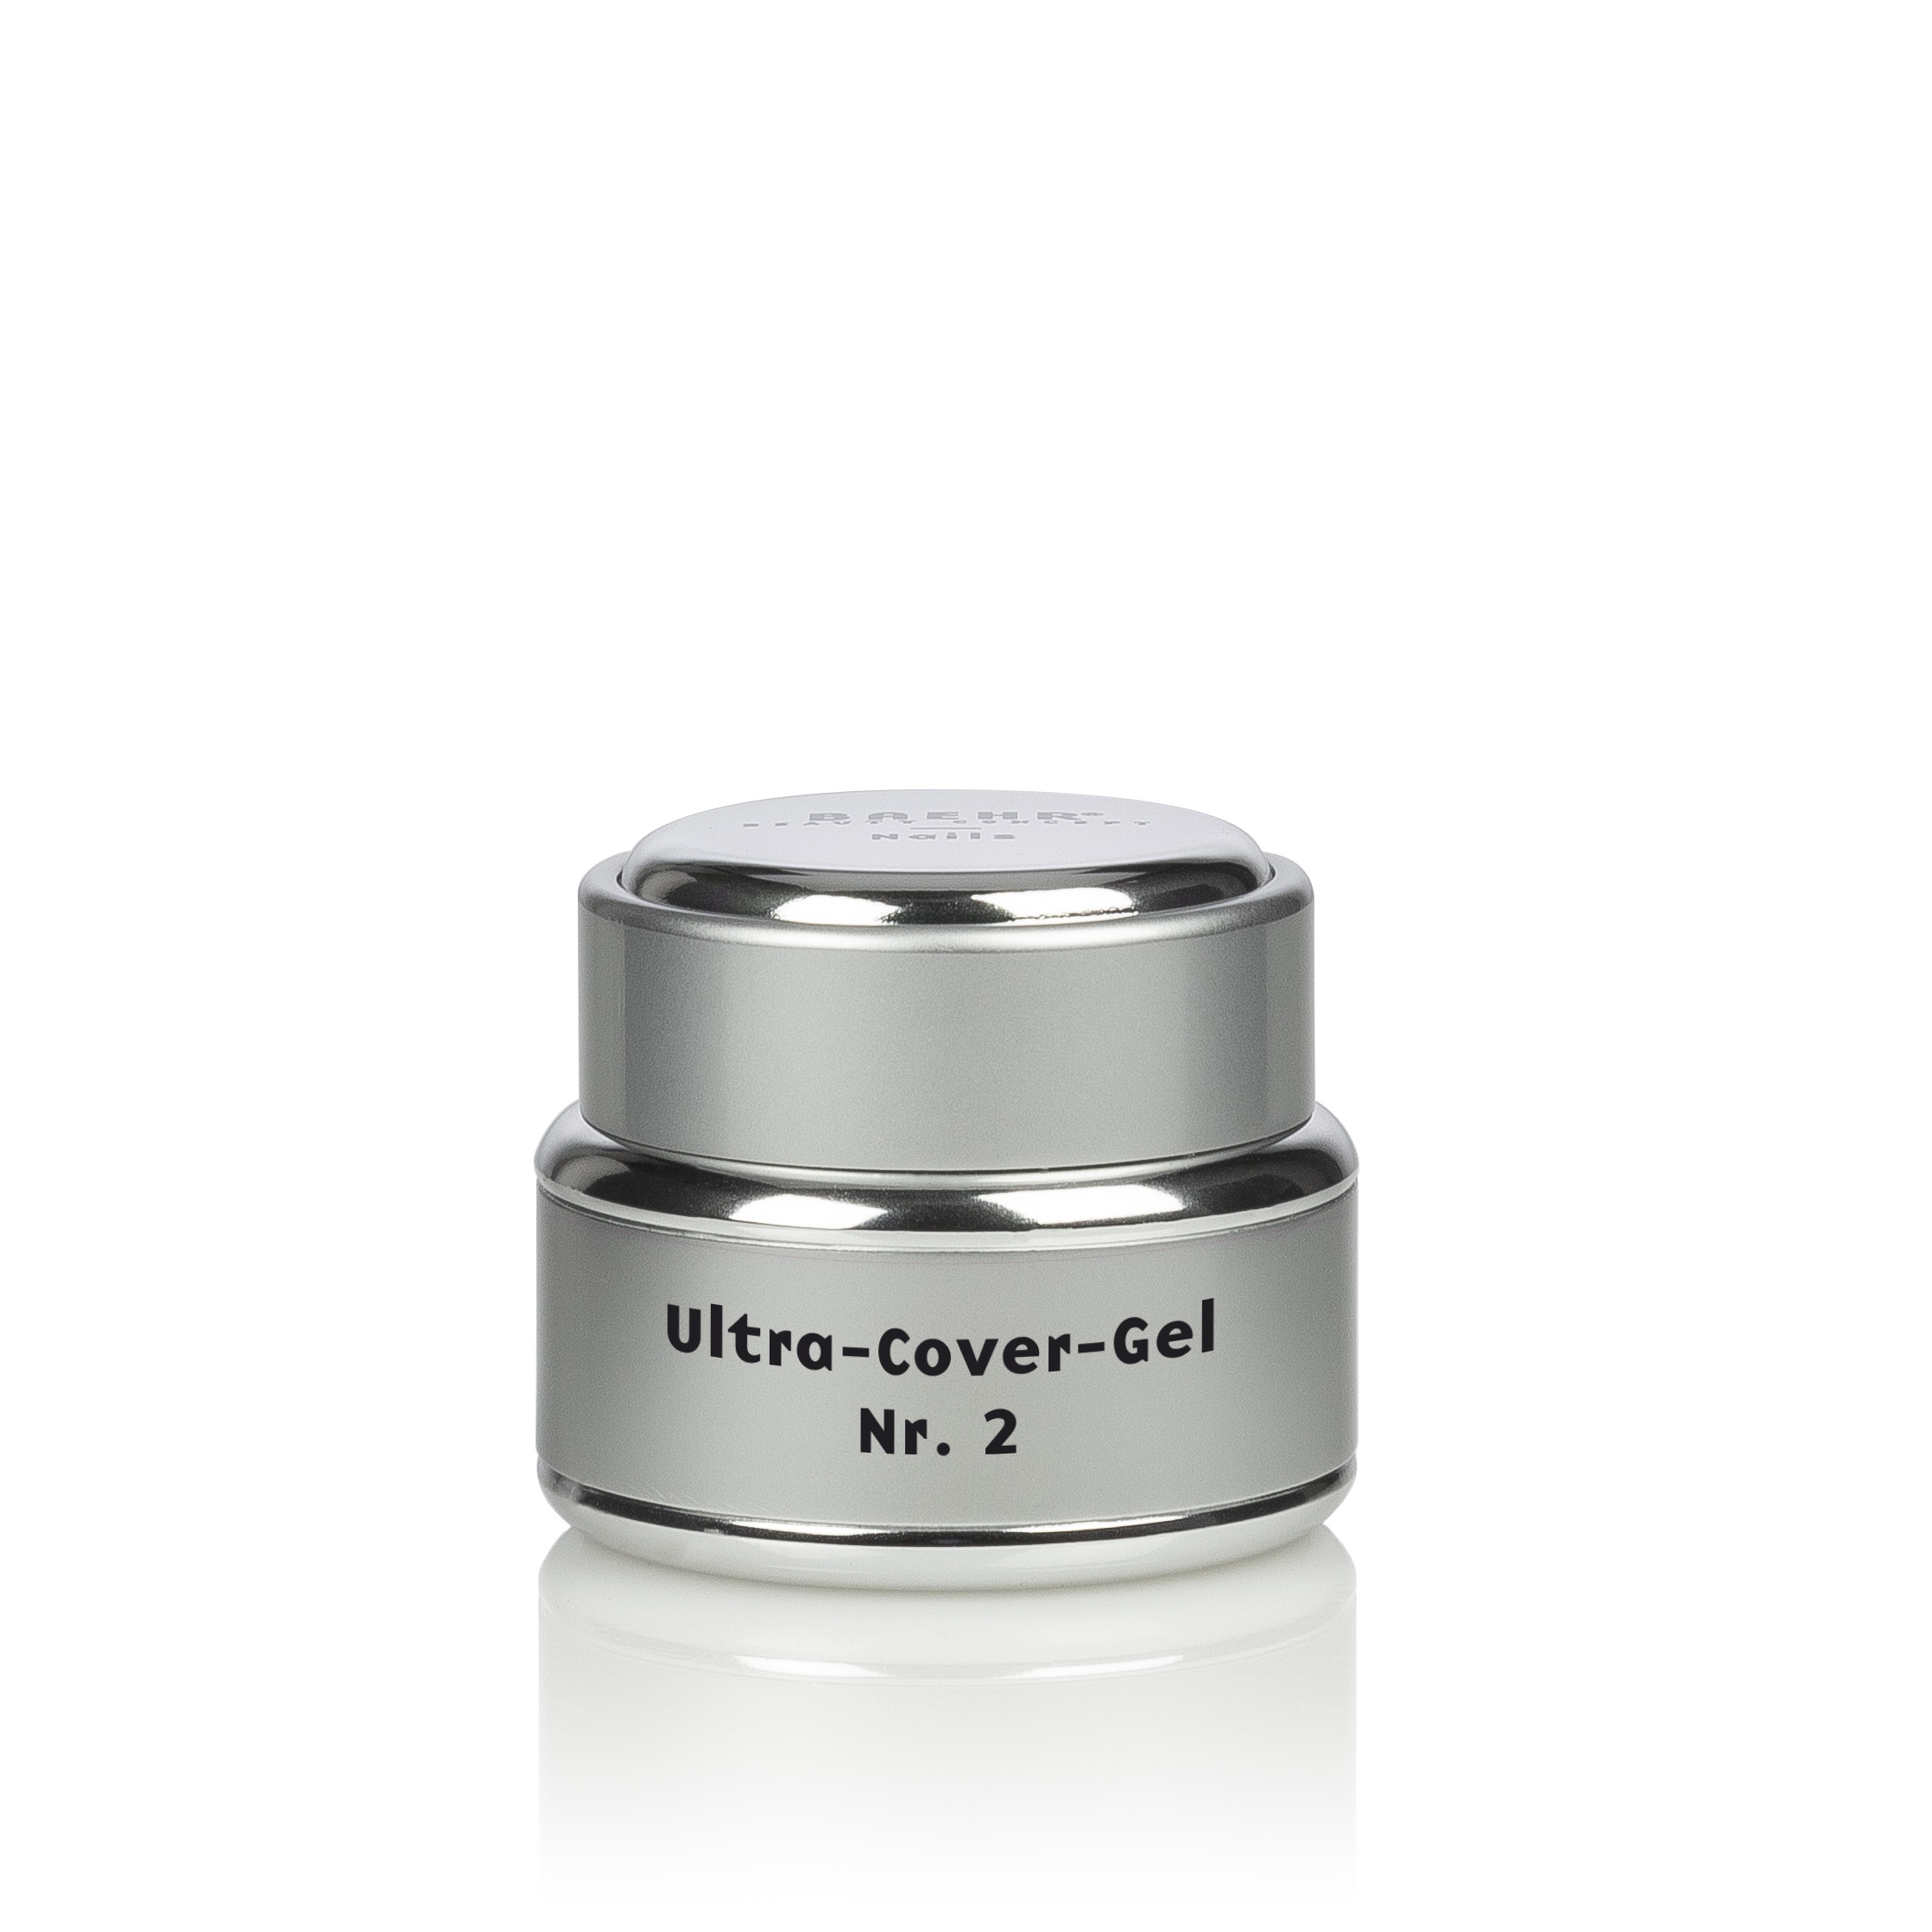 BAEHR BEAUTY CONCEPT - NAILS Ultra-Cover-Gel Nr.2 15 ml